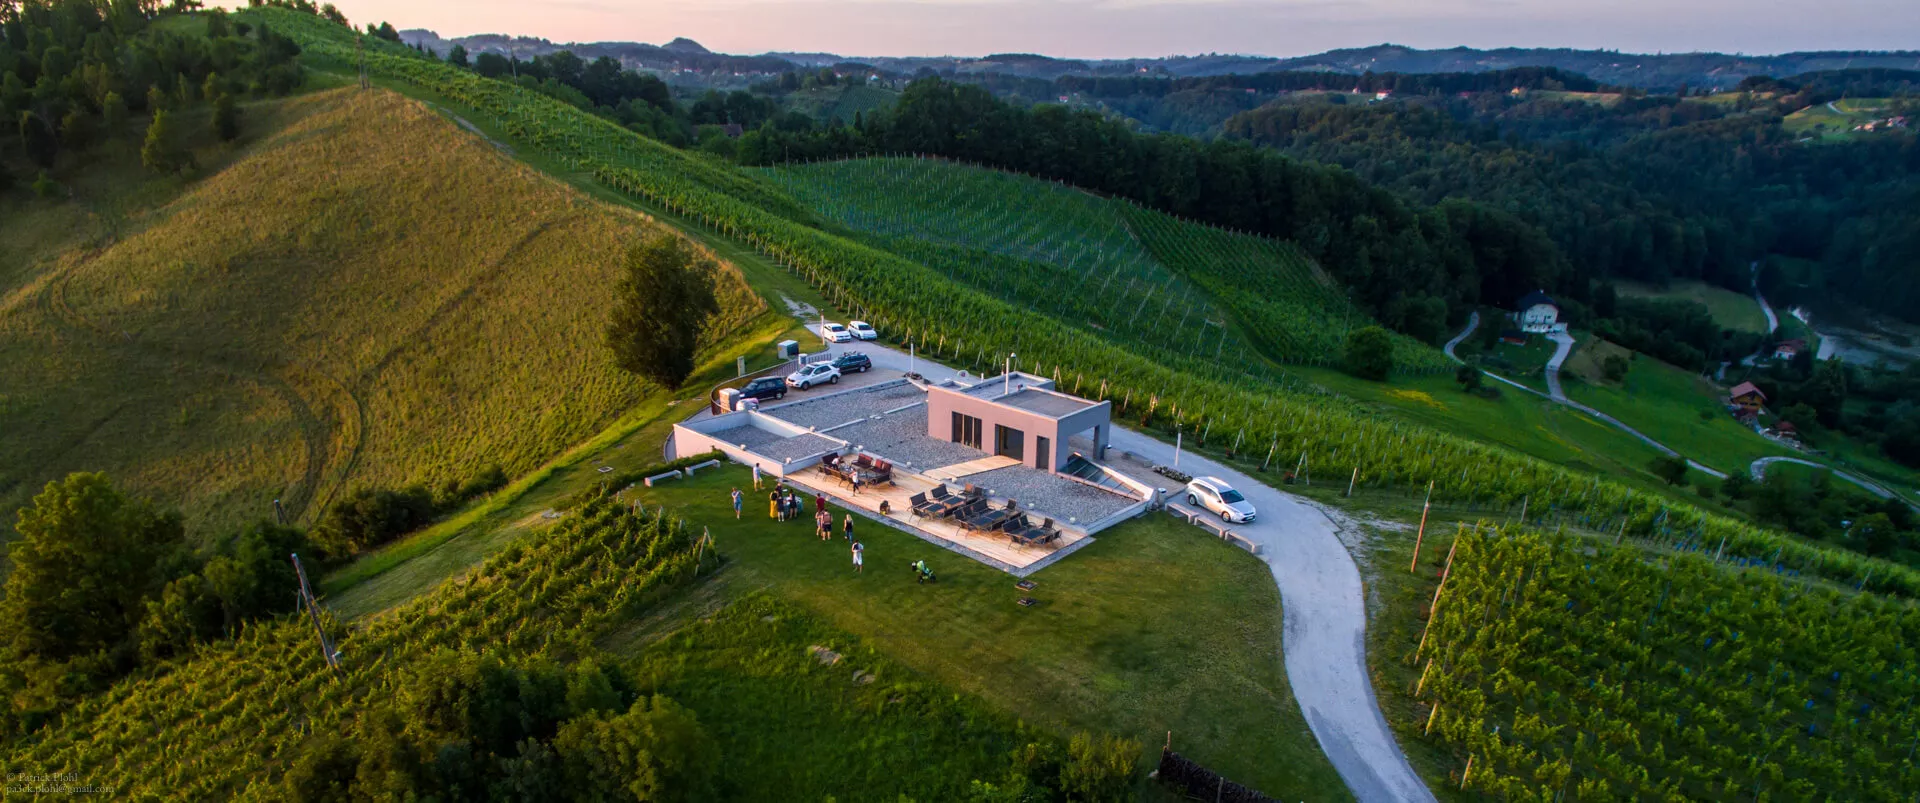 Doppler Winery in Slovenia, Europe | Wineries - Rated 0.9